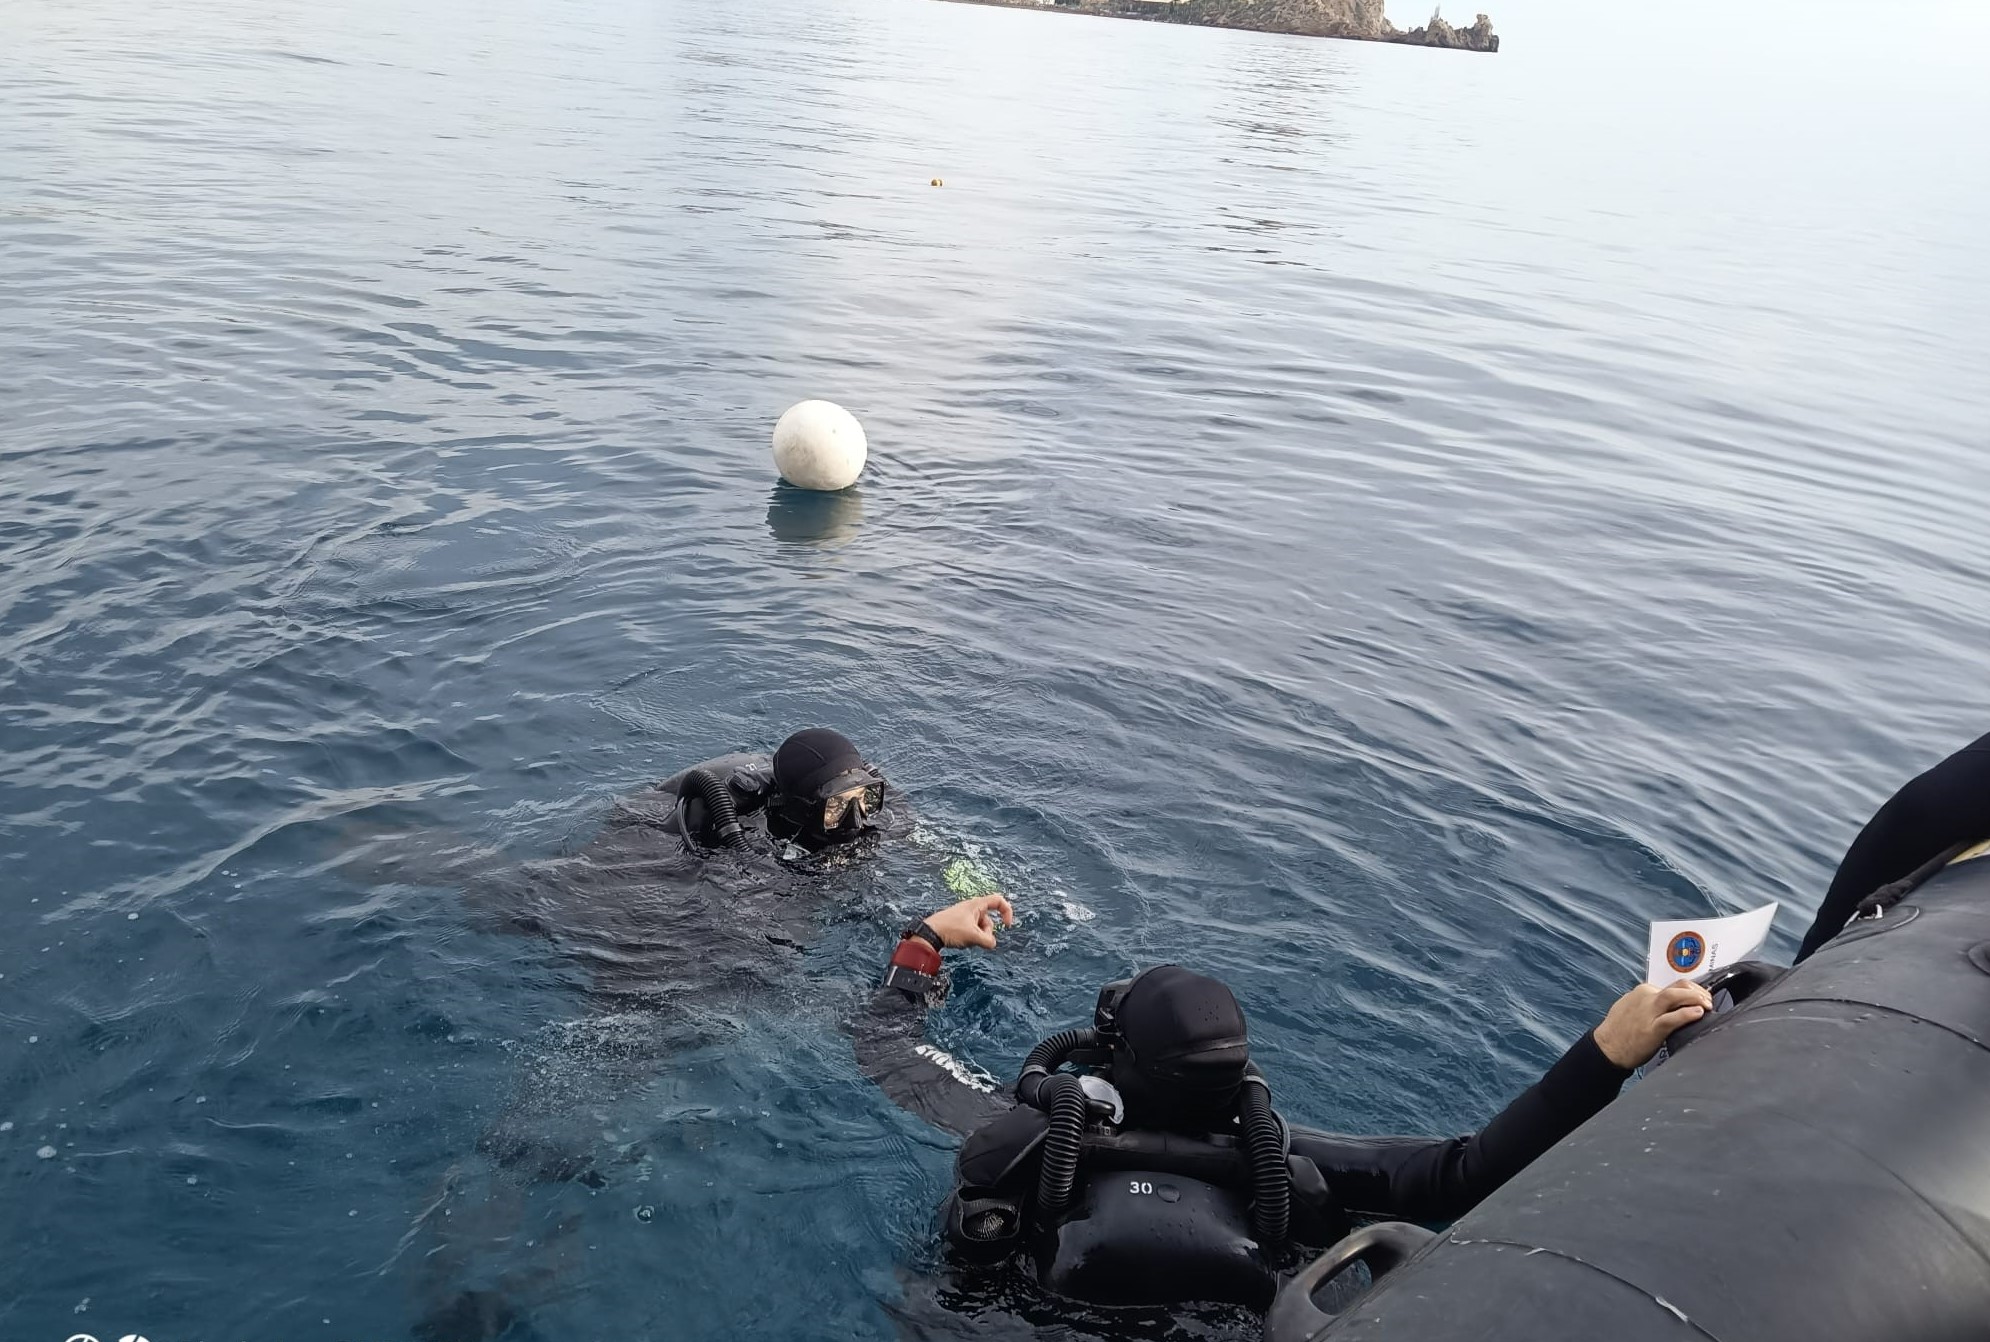 Divers prior to neutralisation of the device